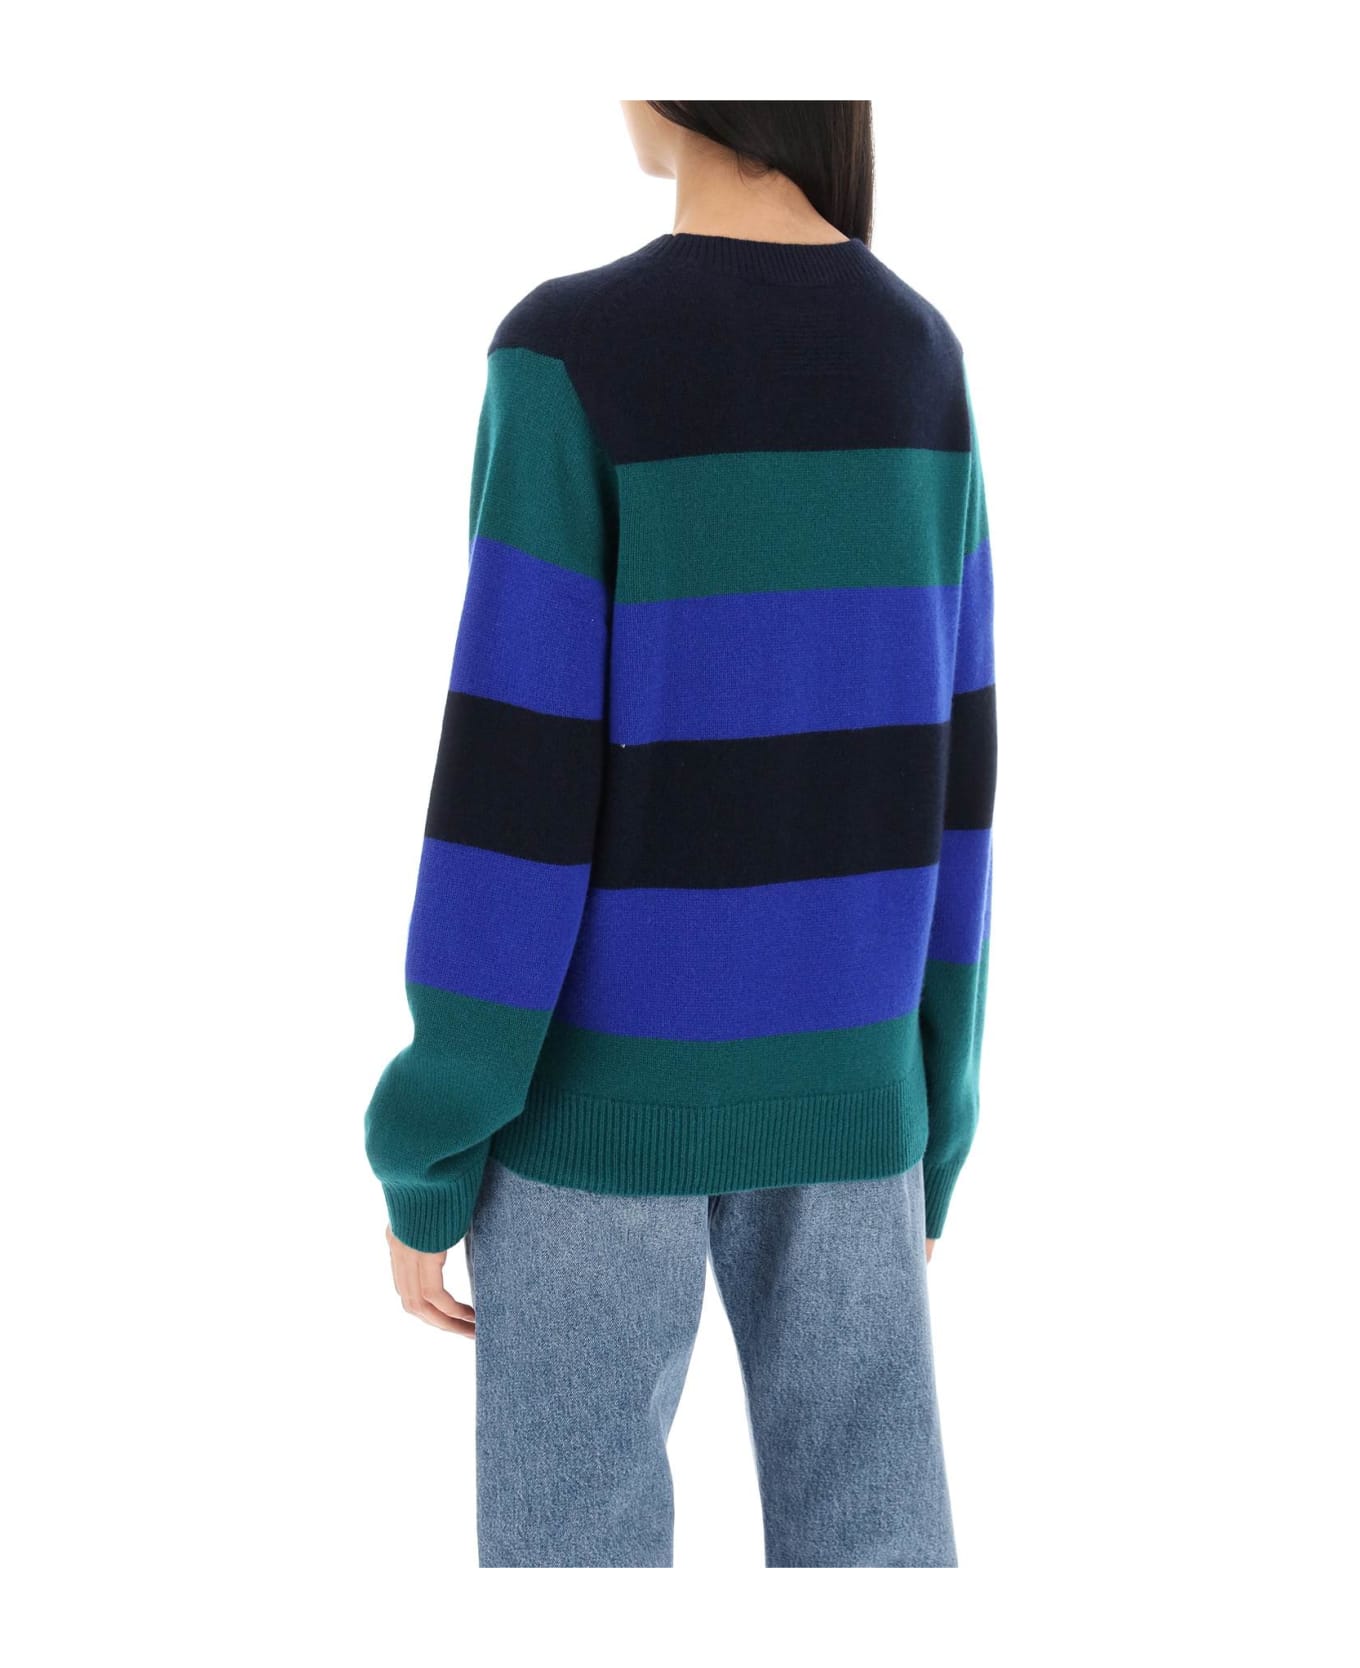 Guest in Residence Striped Cashmere Sweater - FOREST COBALT MIDNIGHT (Green) ニットウェア